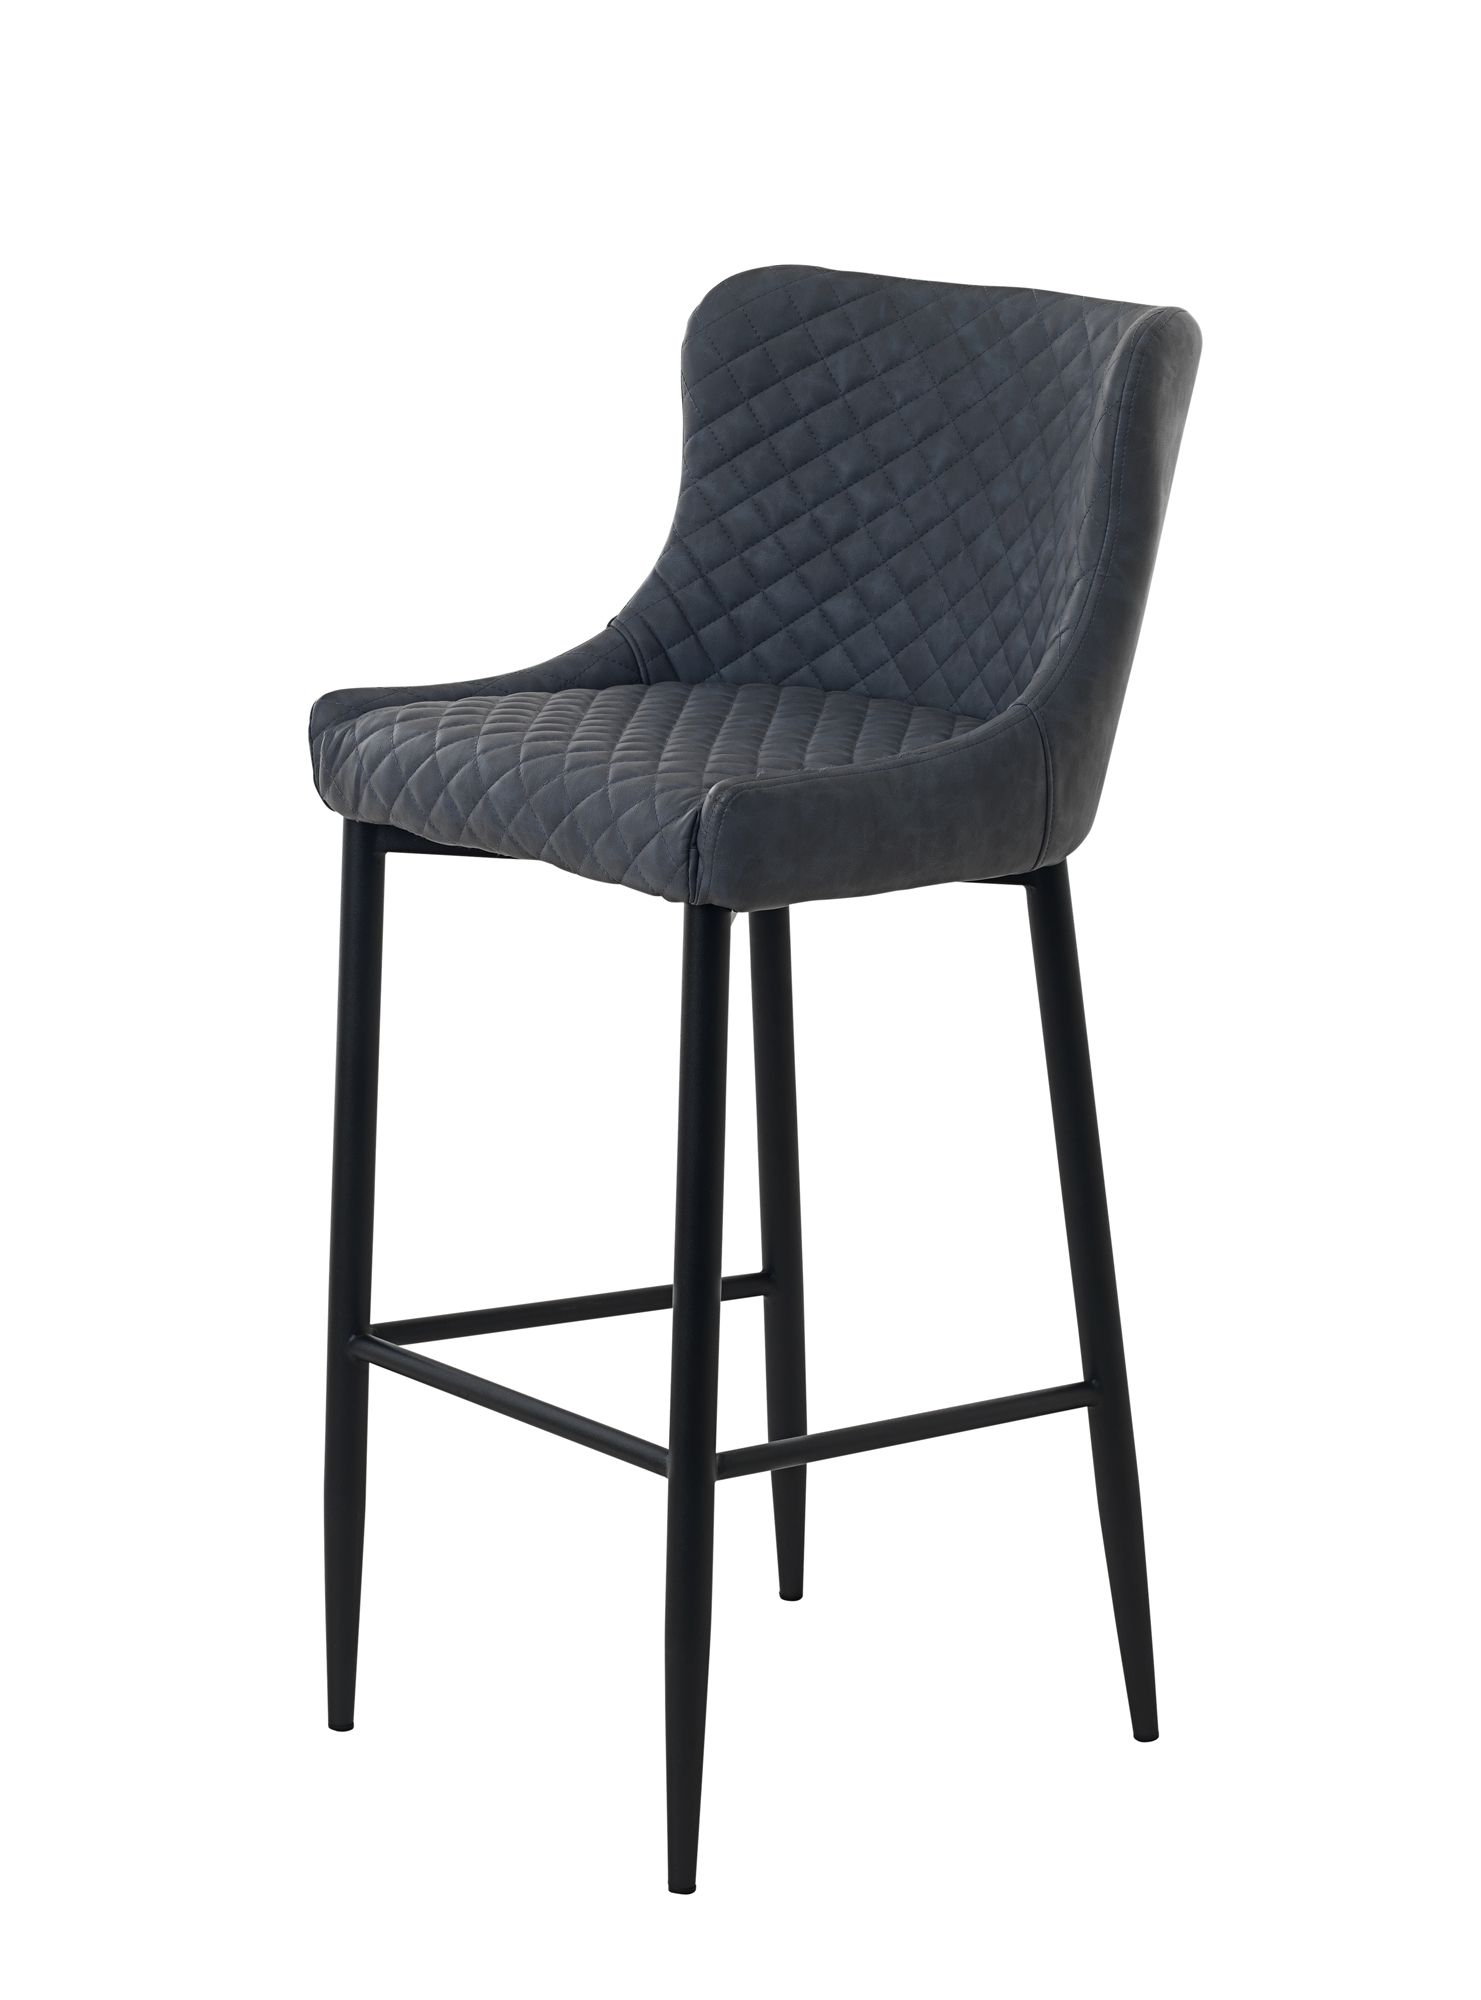 Quebec High Bar Stool Faux Leather Grey, Faux Leather Stool